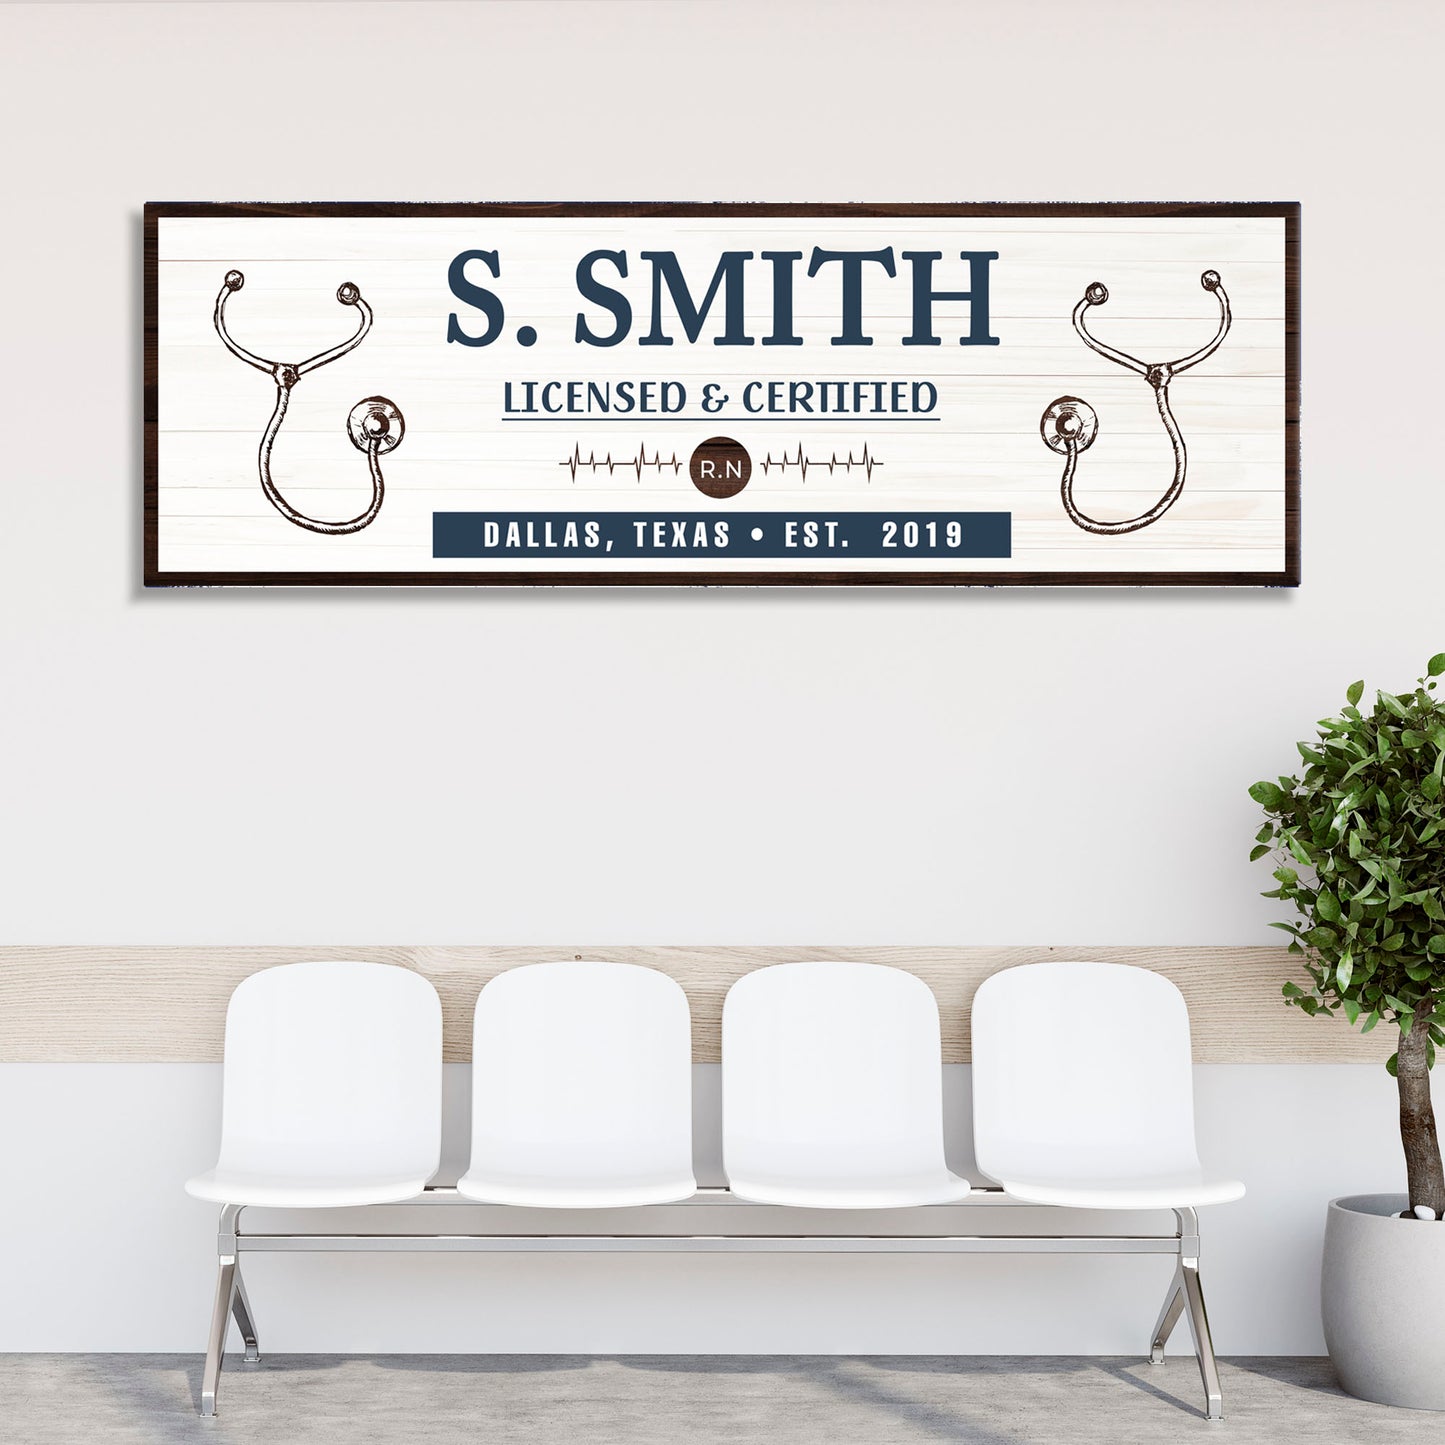 Registered Nurse Sign - Image by Tailored Canvases